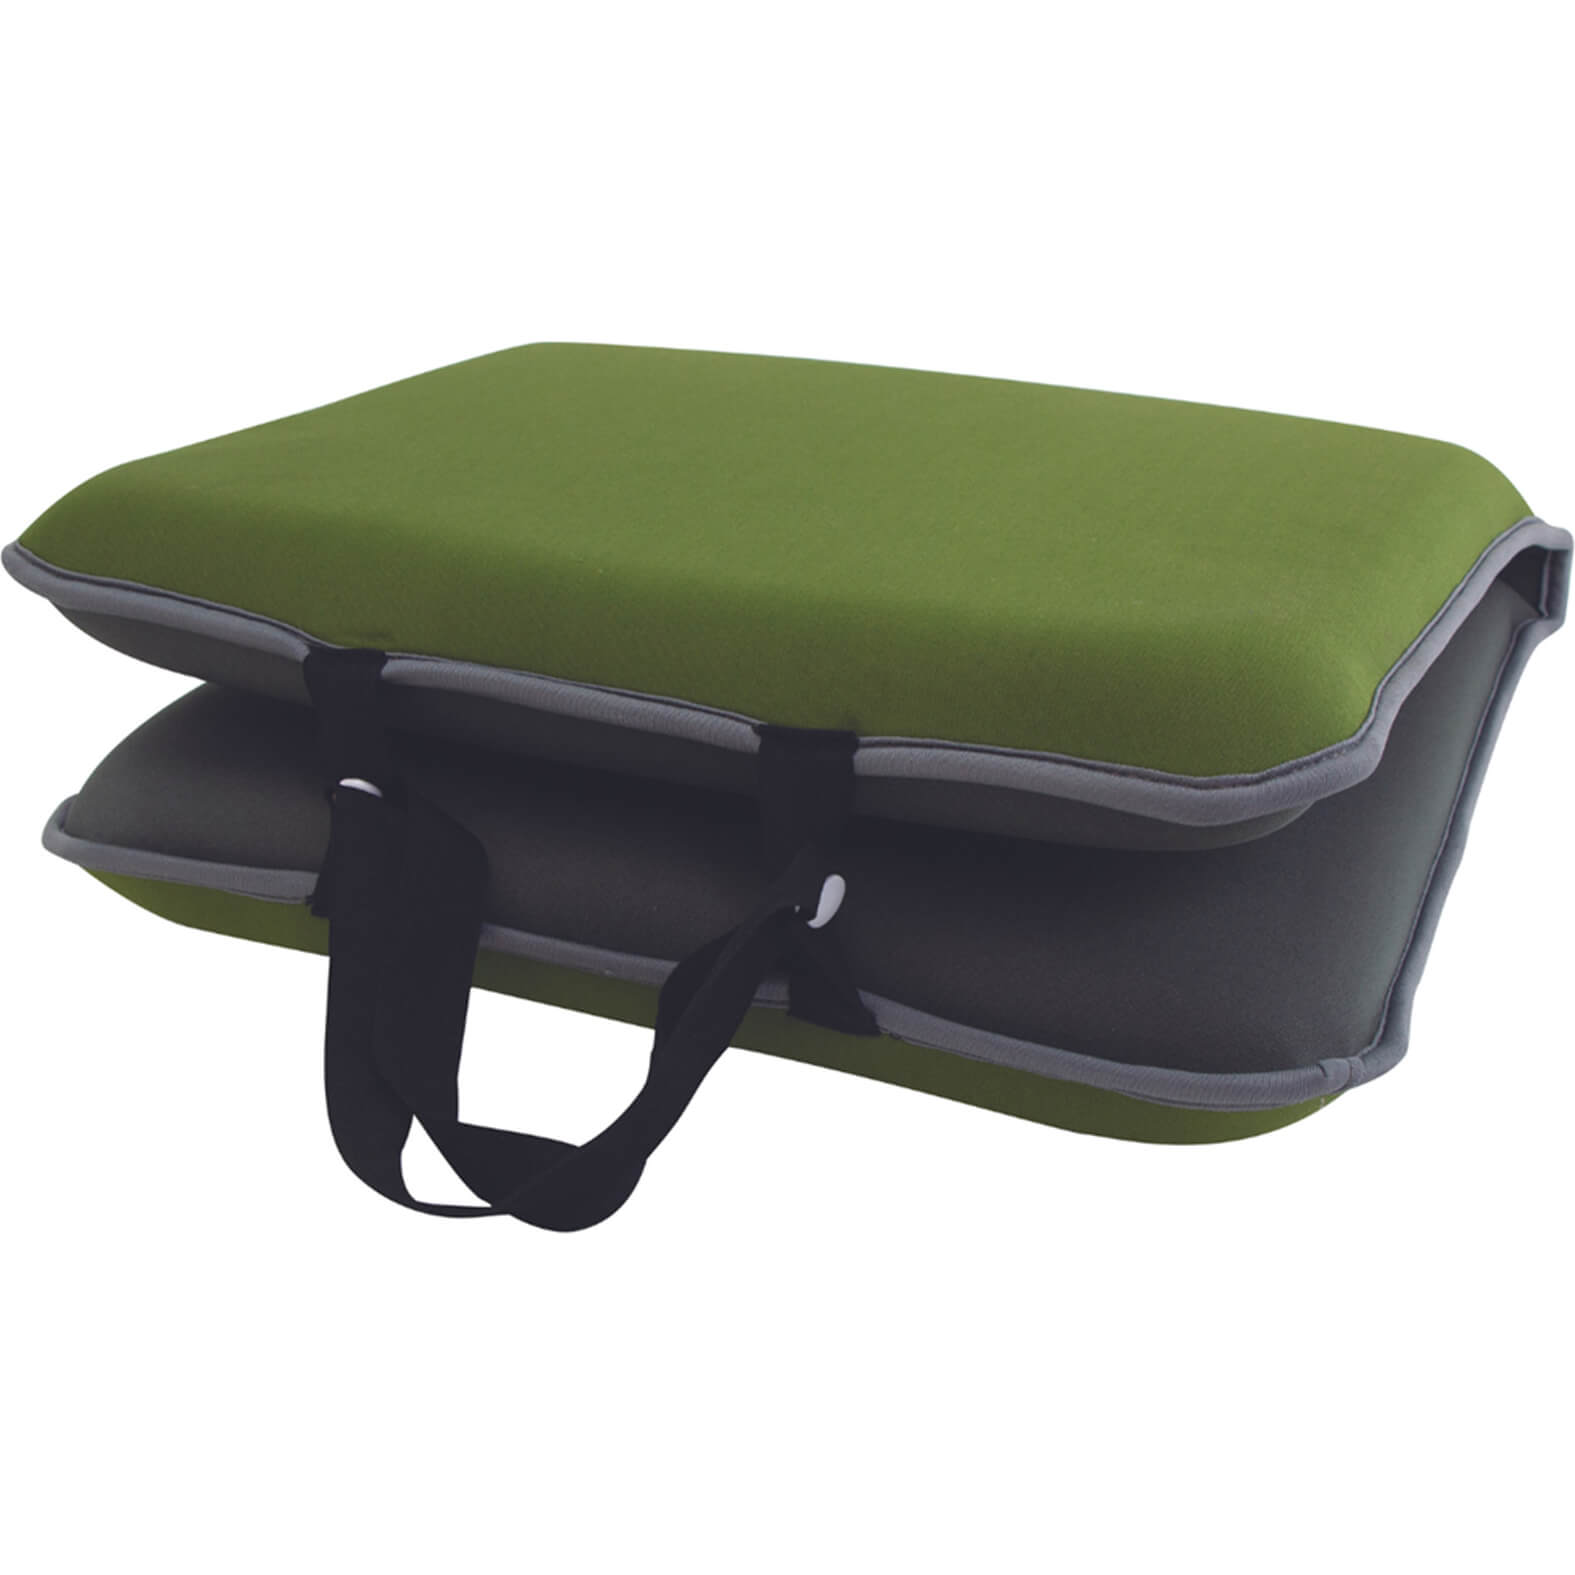 Town and Country Extra Wide Memory Foam Garden Kneeler Green